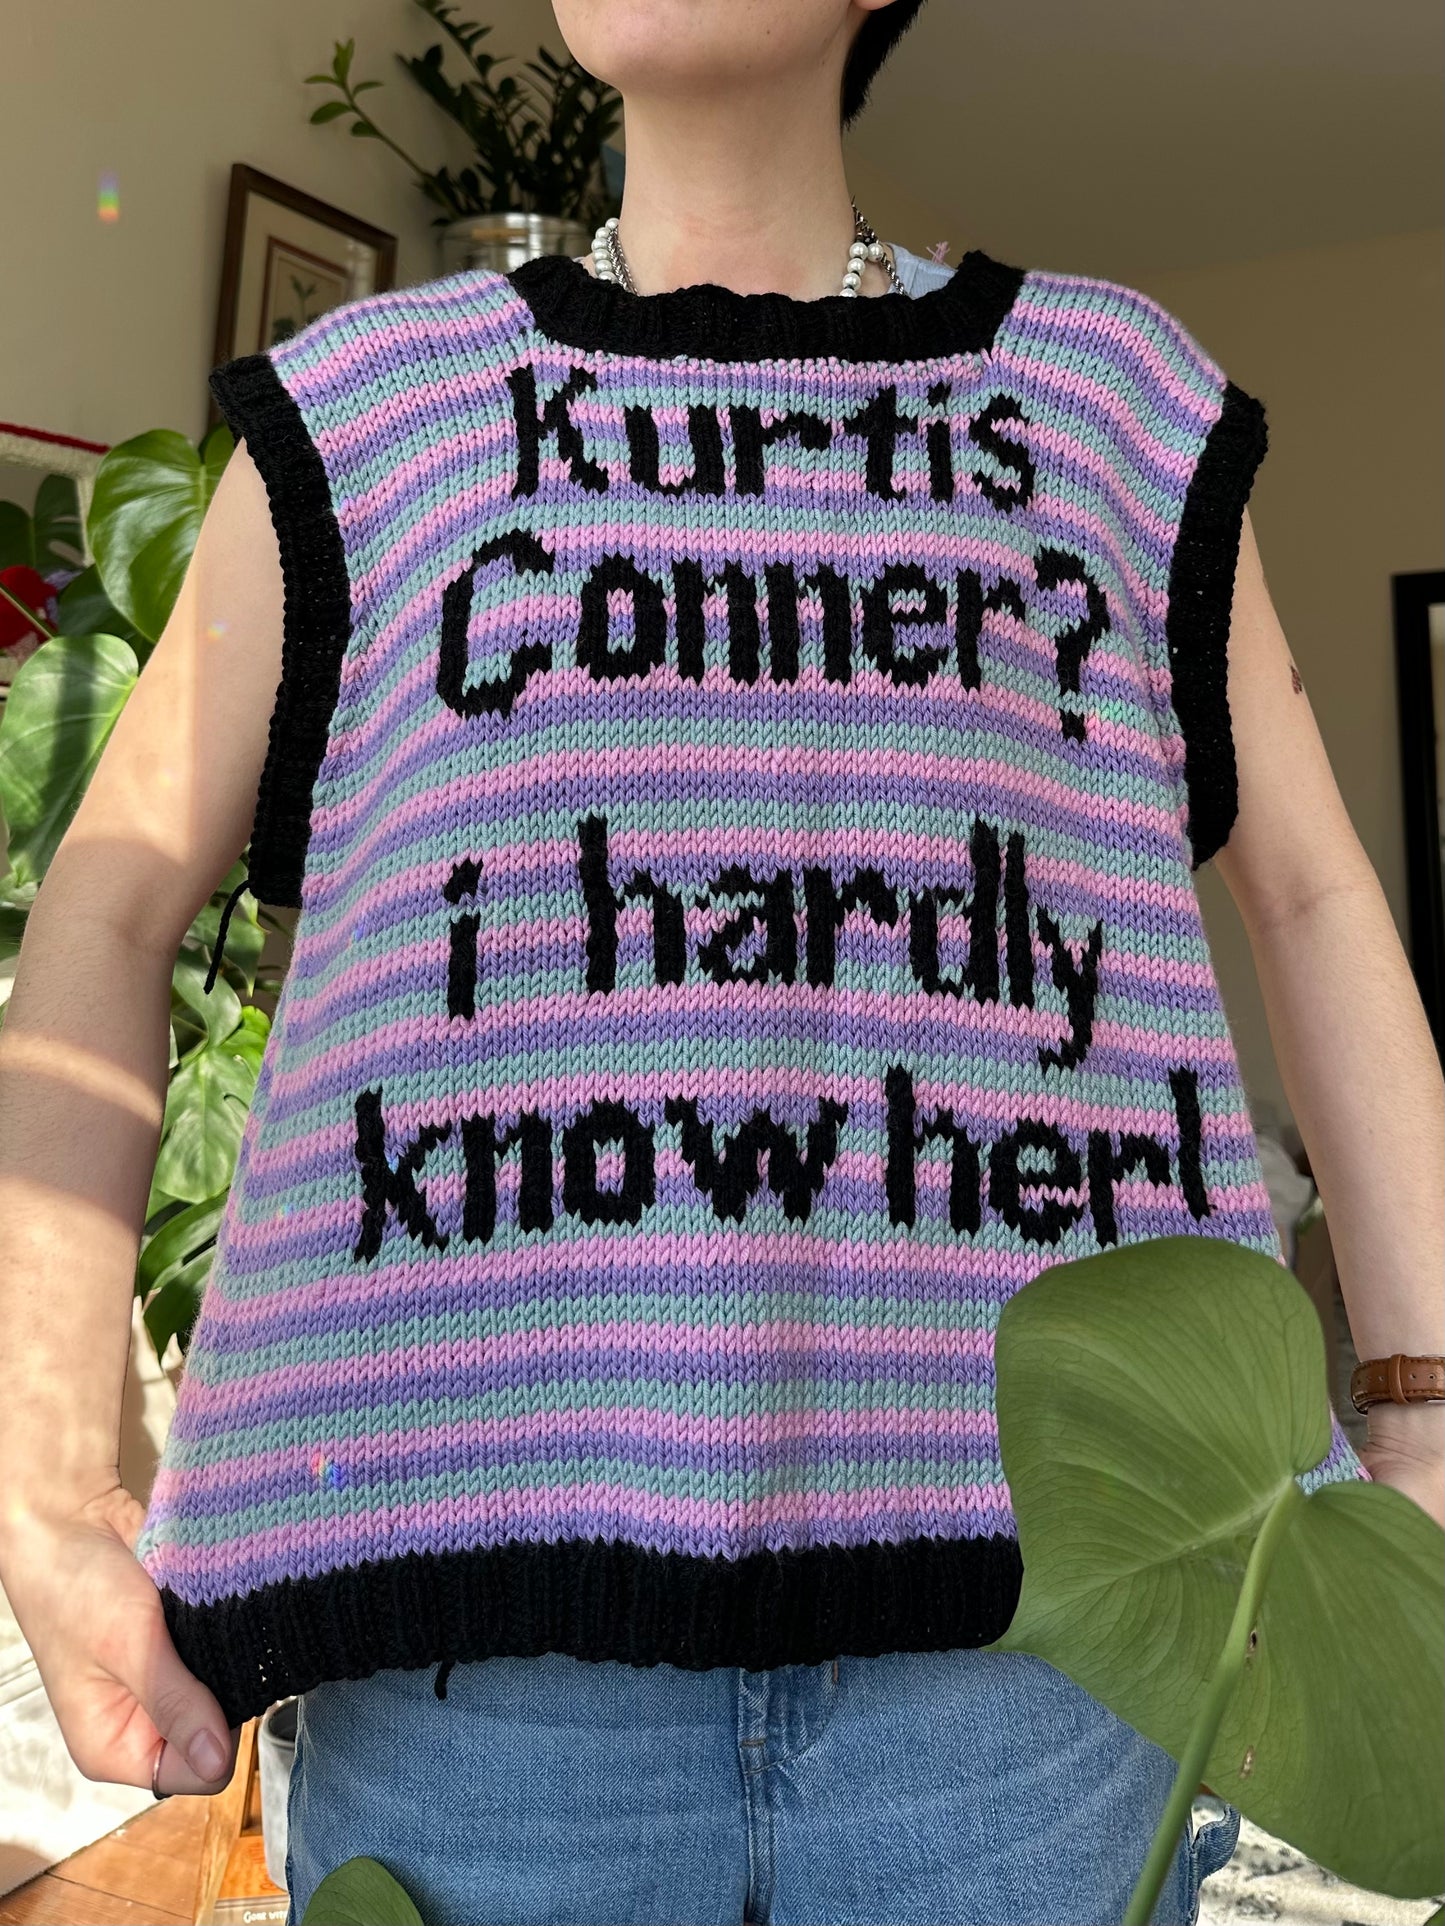 PDF: kurtis conner? i hardly know her knit colorwork chart (no pattern)